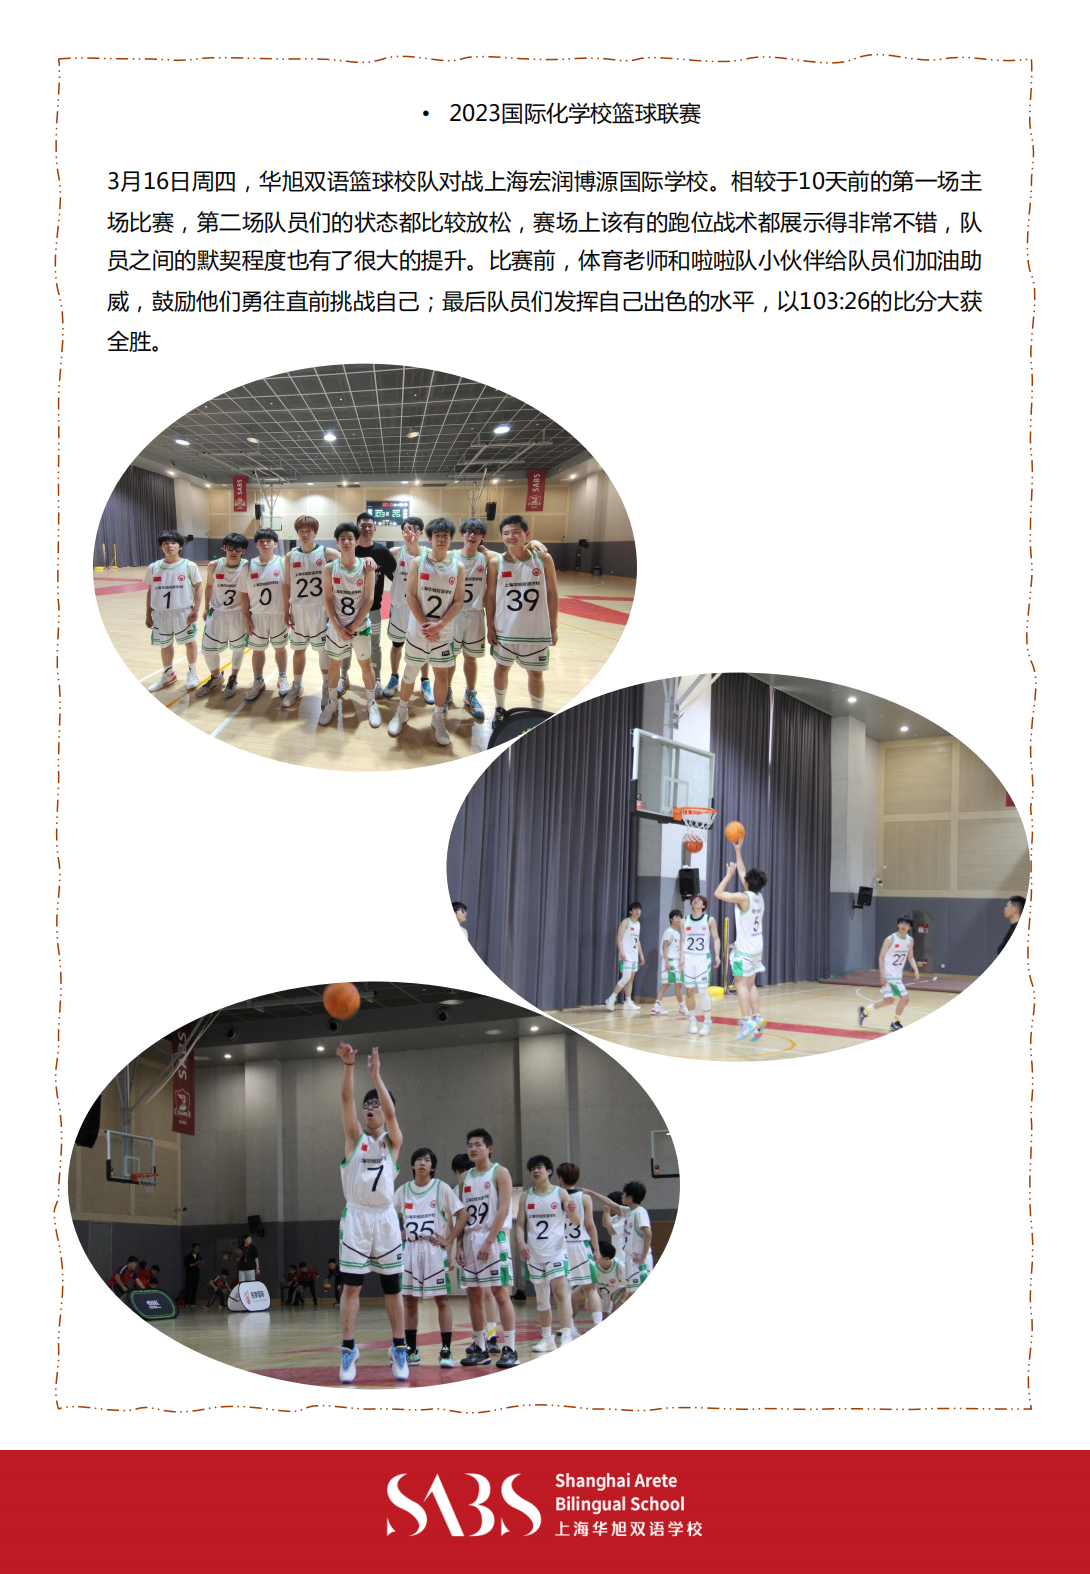 HS 3rd Issue Newsletter pptx（Chinese）_22.png